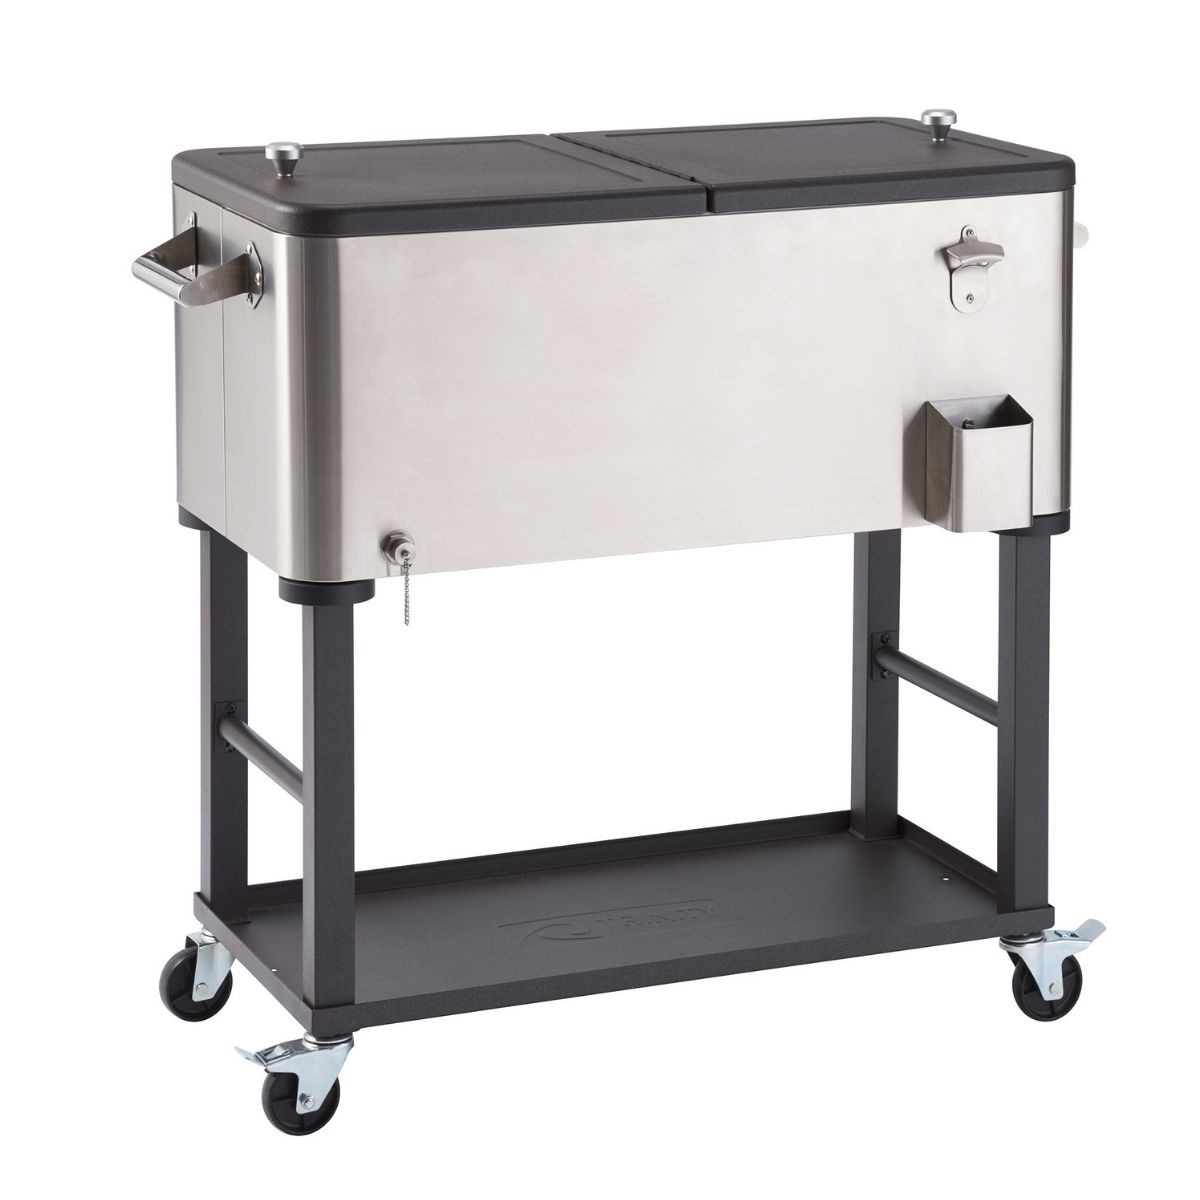 Txk-0805 100 Qt. Stainless Steel Cooler With Detachable Tub - 36 X 38.25 X 20 In.